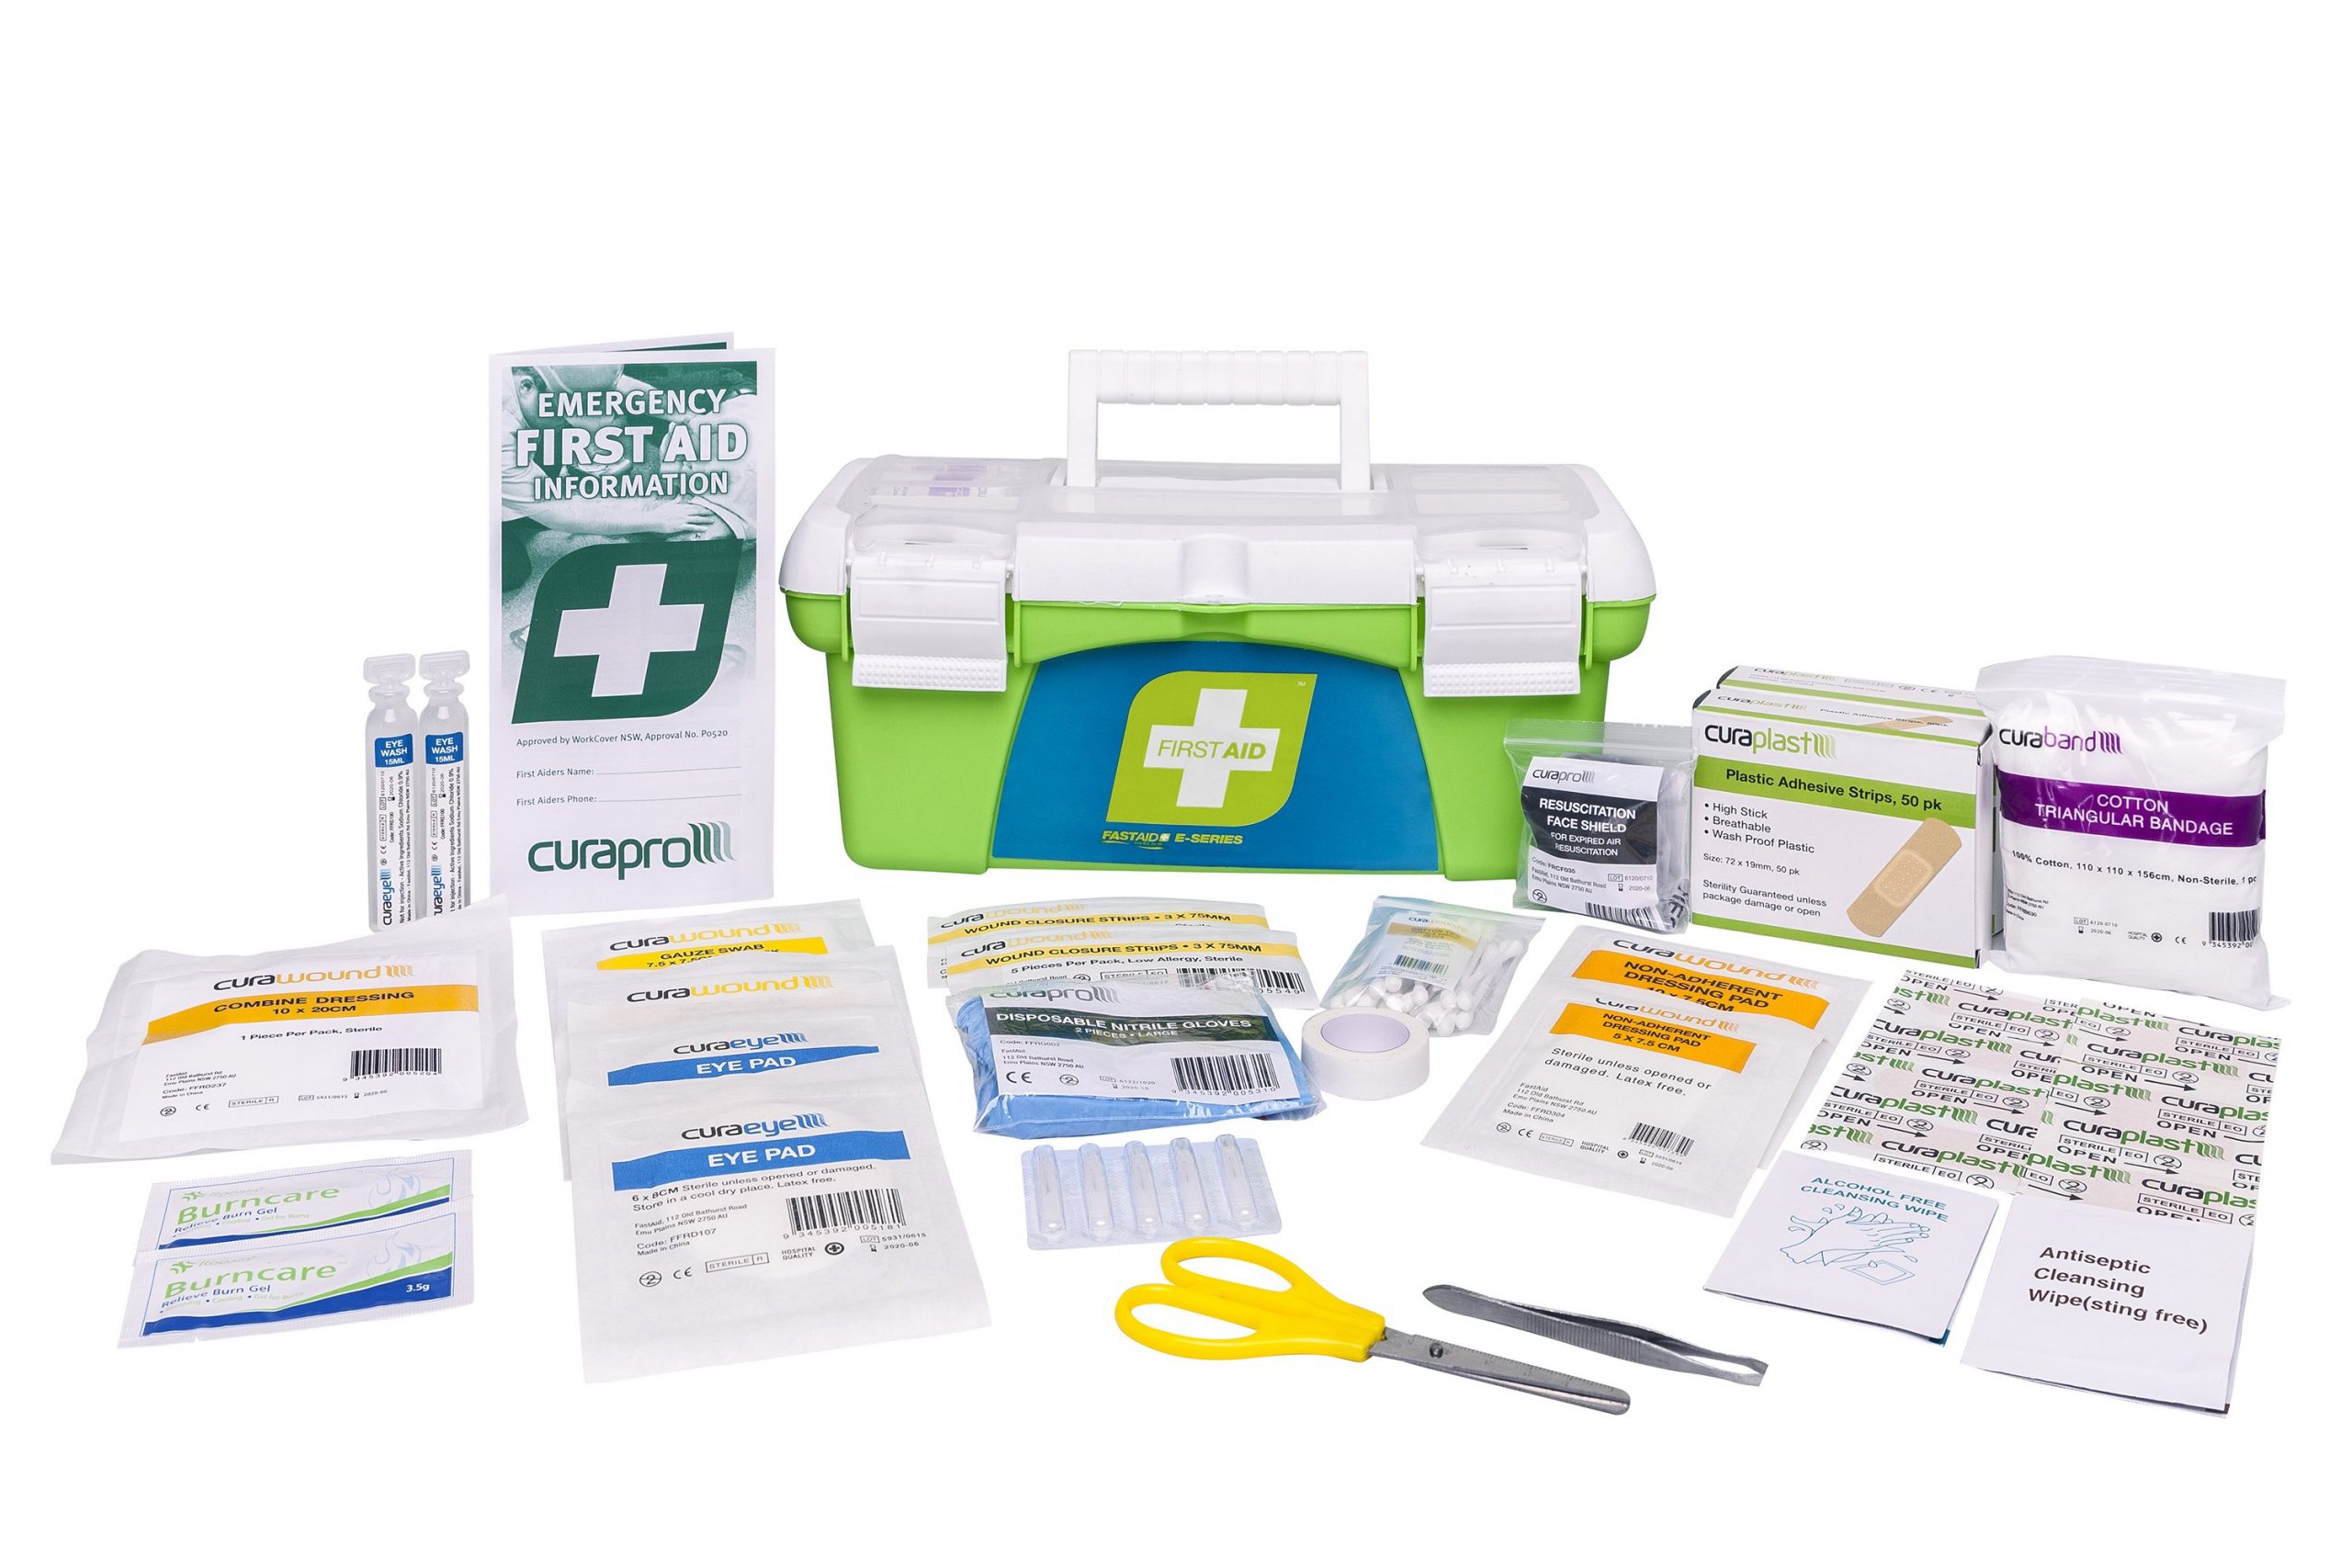 E-Series D.I.Y. Workshop First Aid Kit, Tackle Box